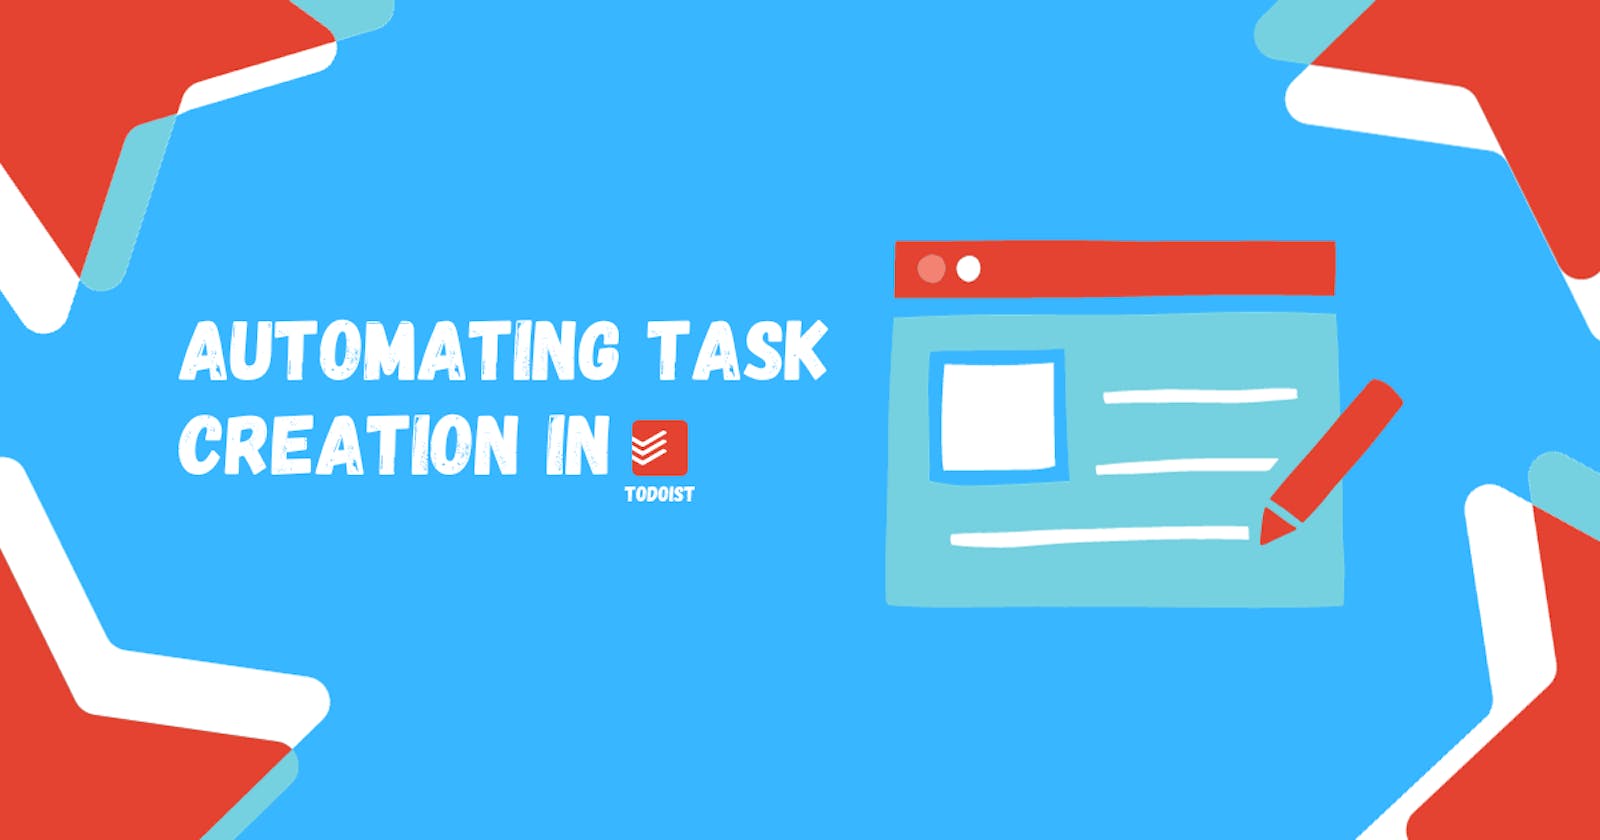 Automating task creation in ToDoIst